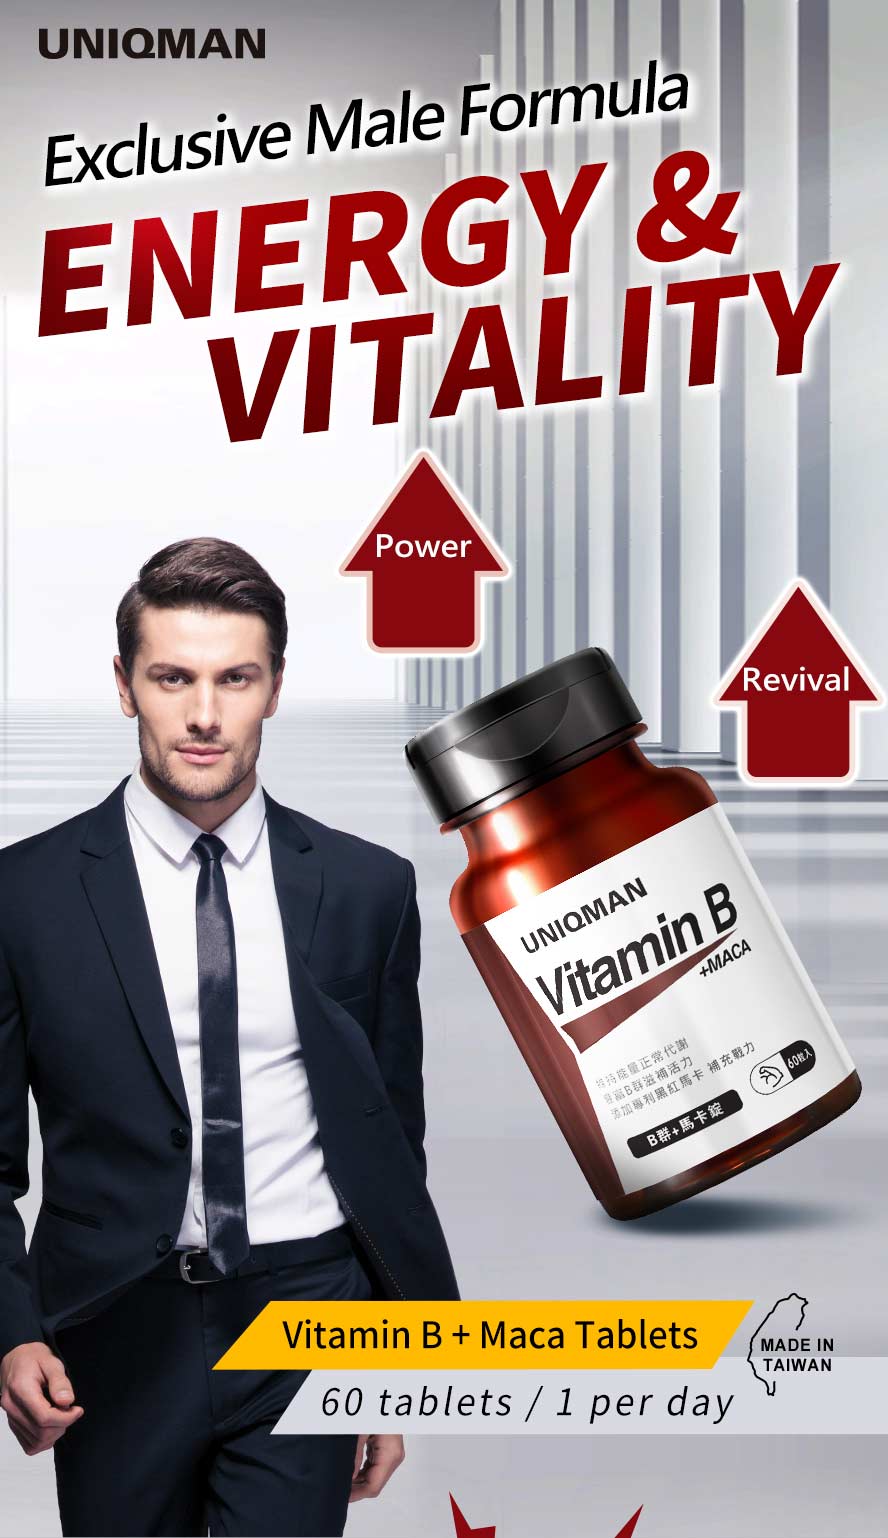 UNIQMAN Vitamin B complex with maca provides overall energy and stamina, fight fatigue all day long